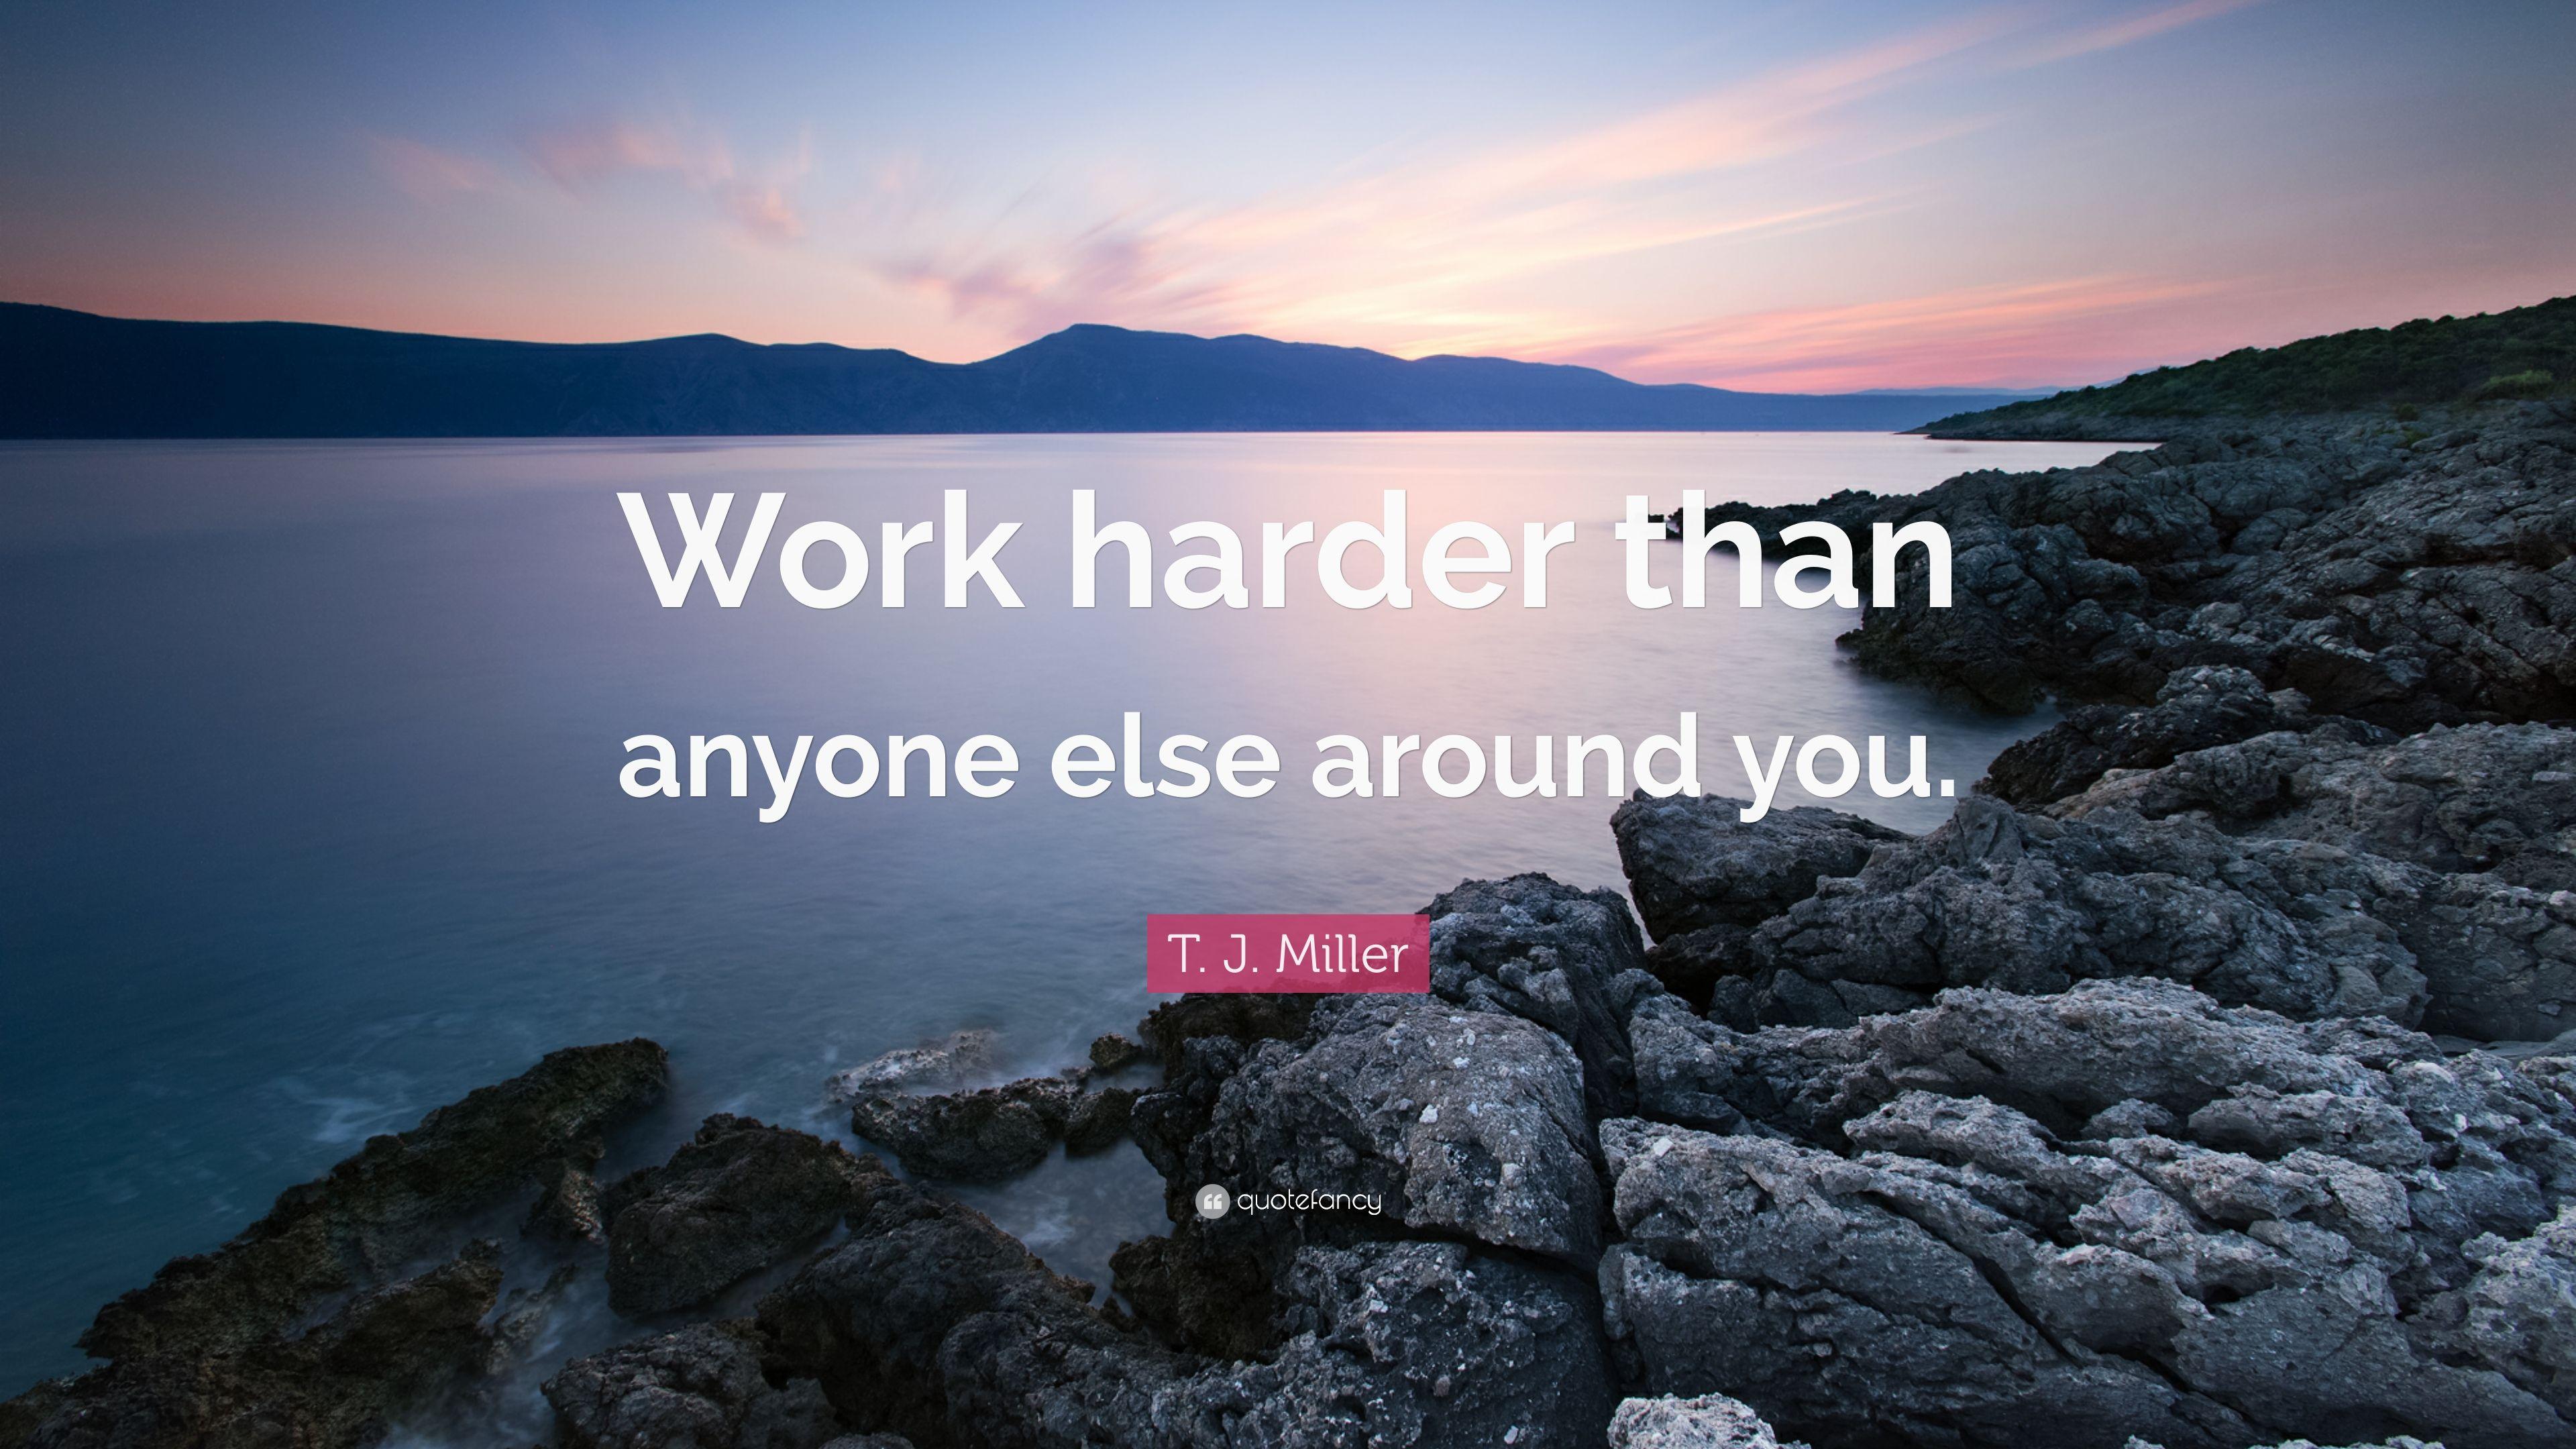 T. J. Miller Quote: “Work harder than anyone else around you.” 10